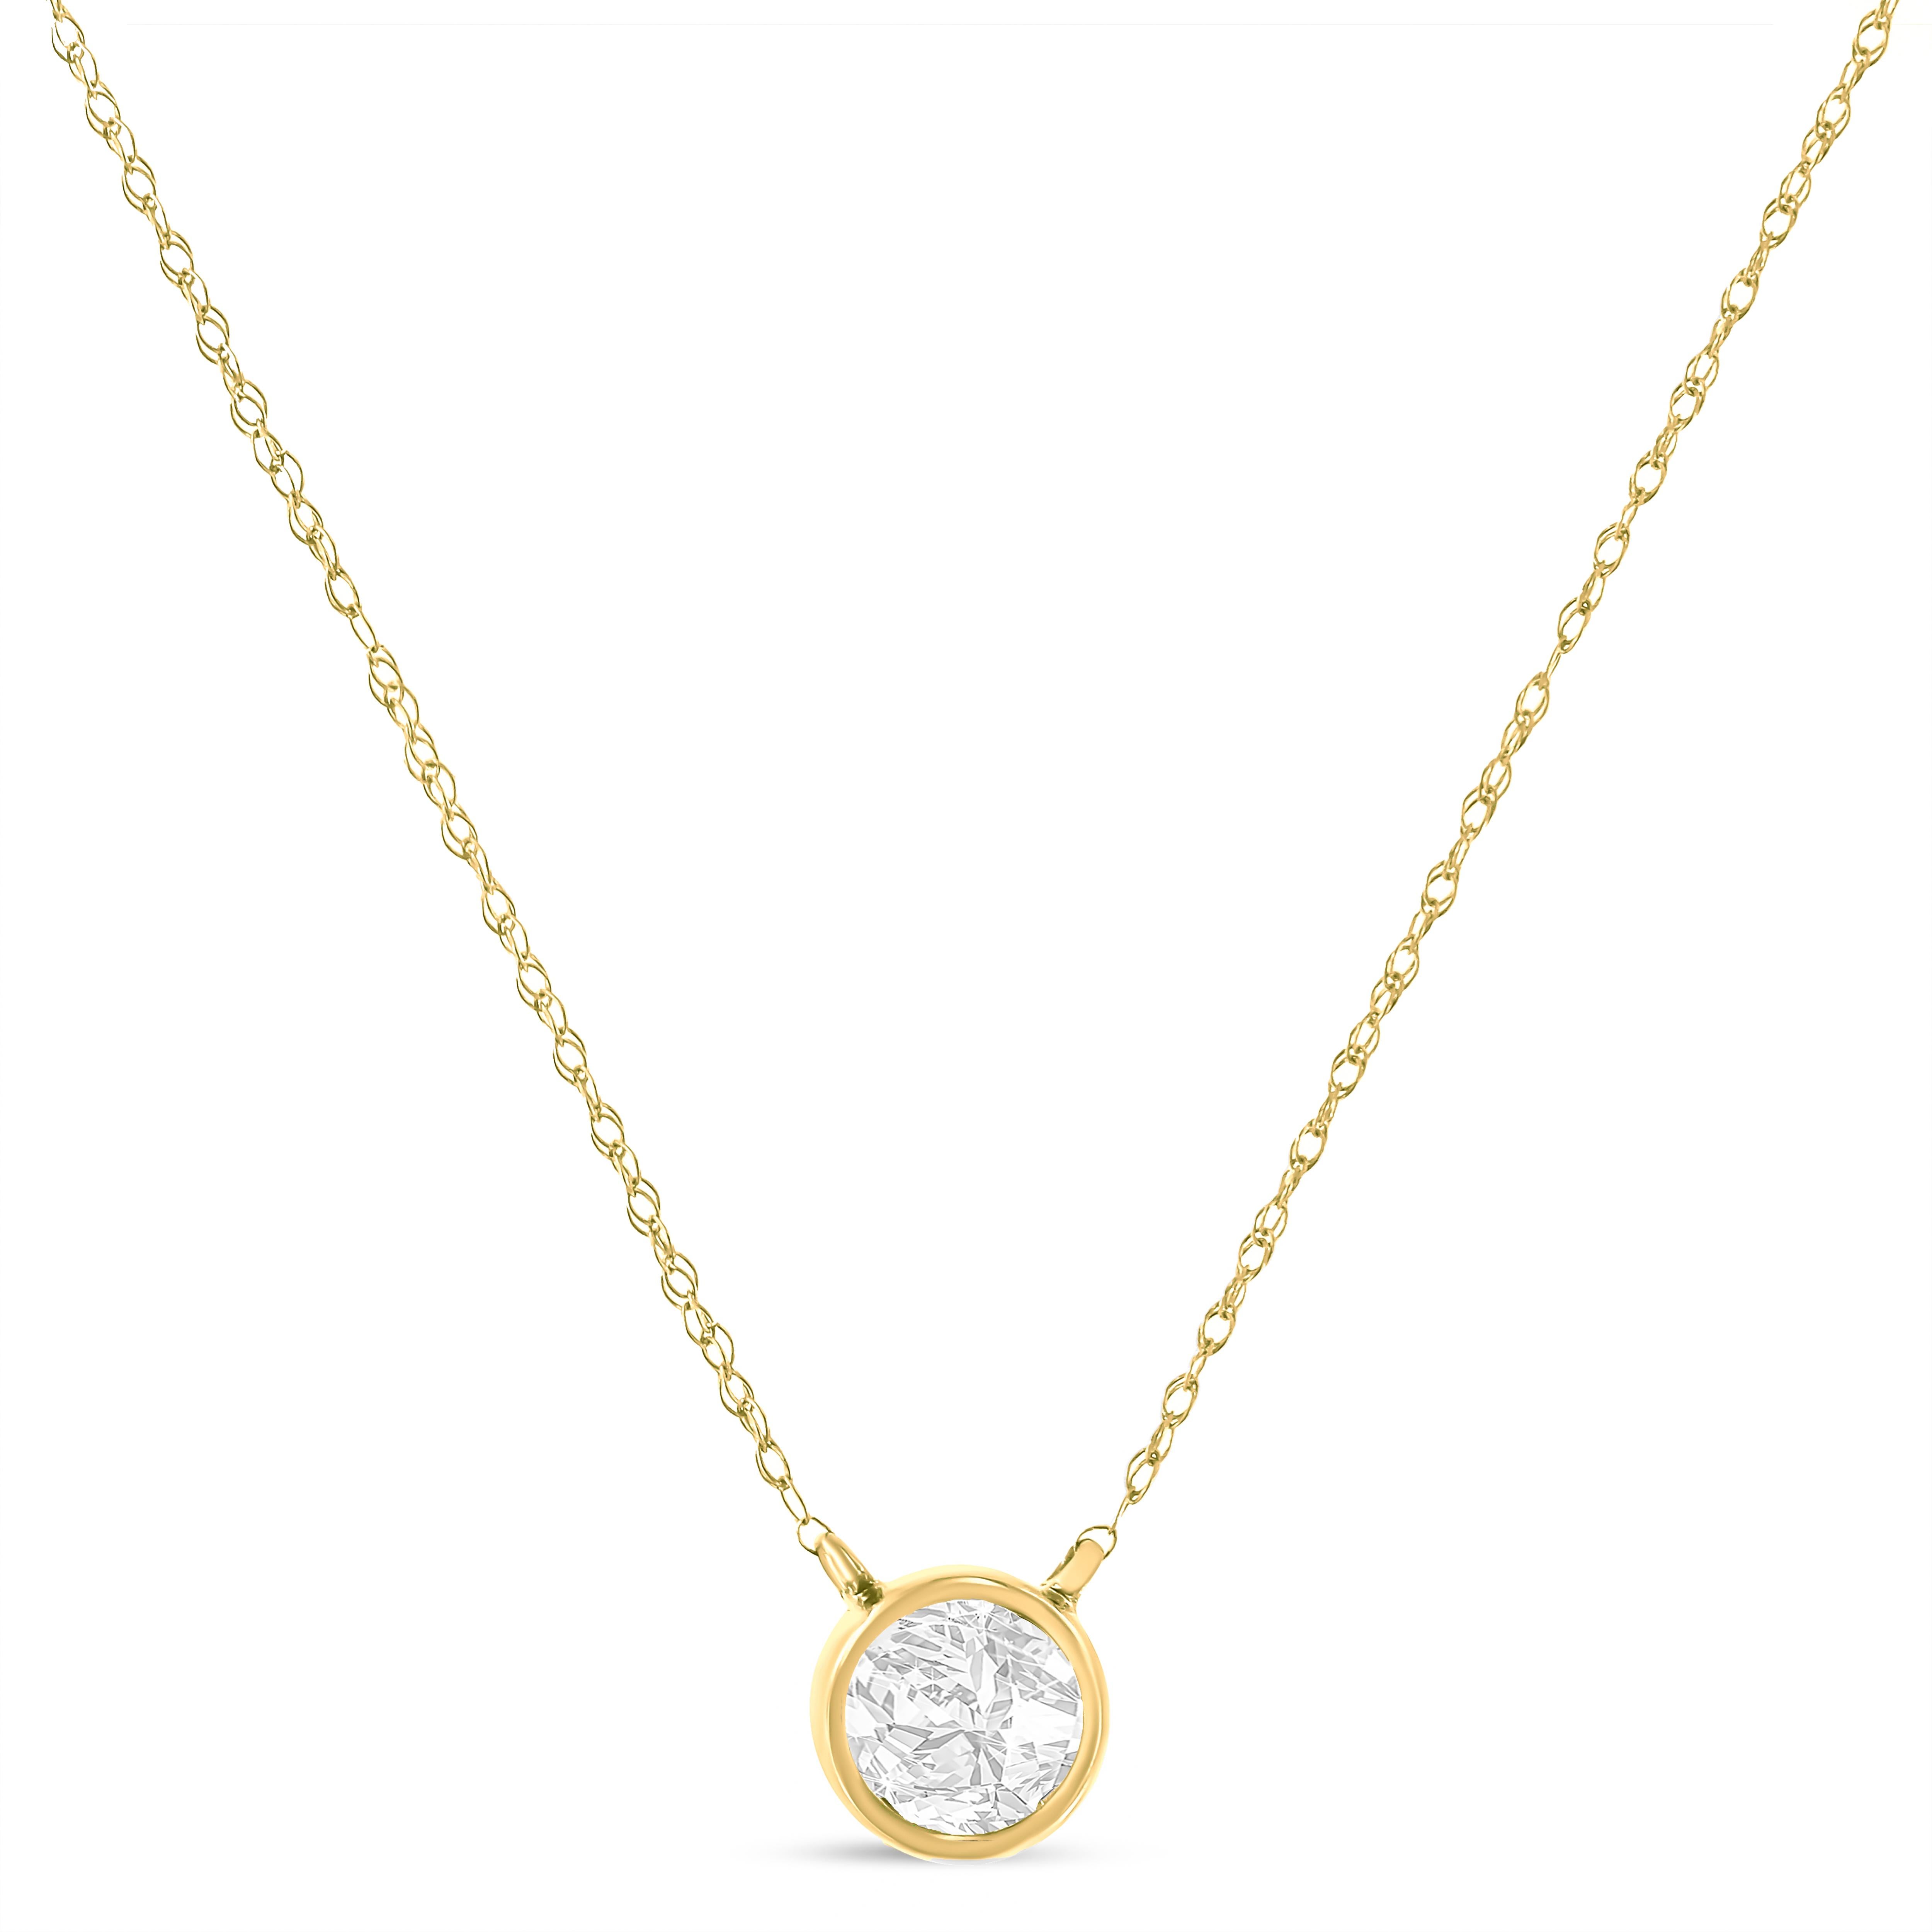 Some things shouldn't be reinvented, which is why we created the Solitaire Diamond Necklace. This is the perfect way to highlight every big occasion, transition, and personal achievement in your life. This solitaire diamond necklace features a